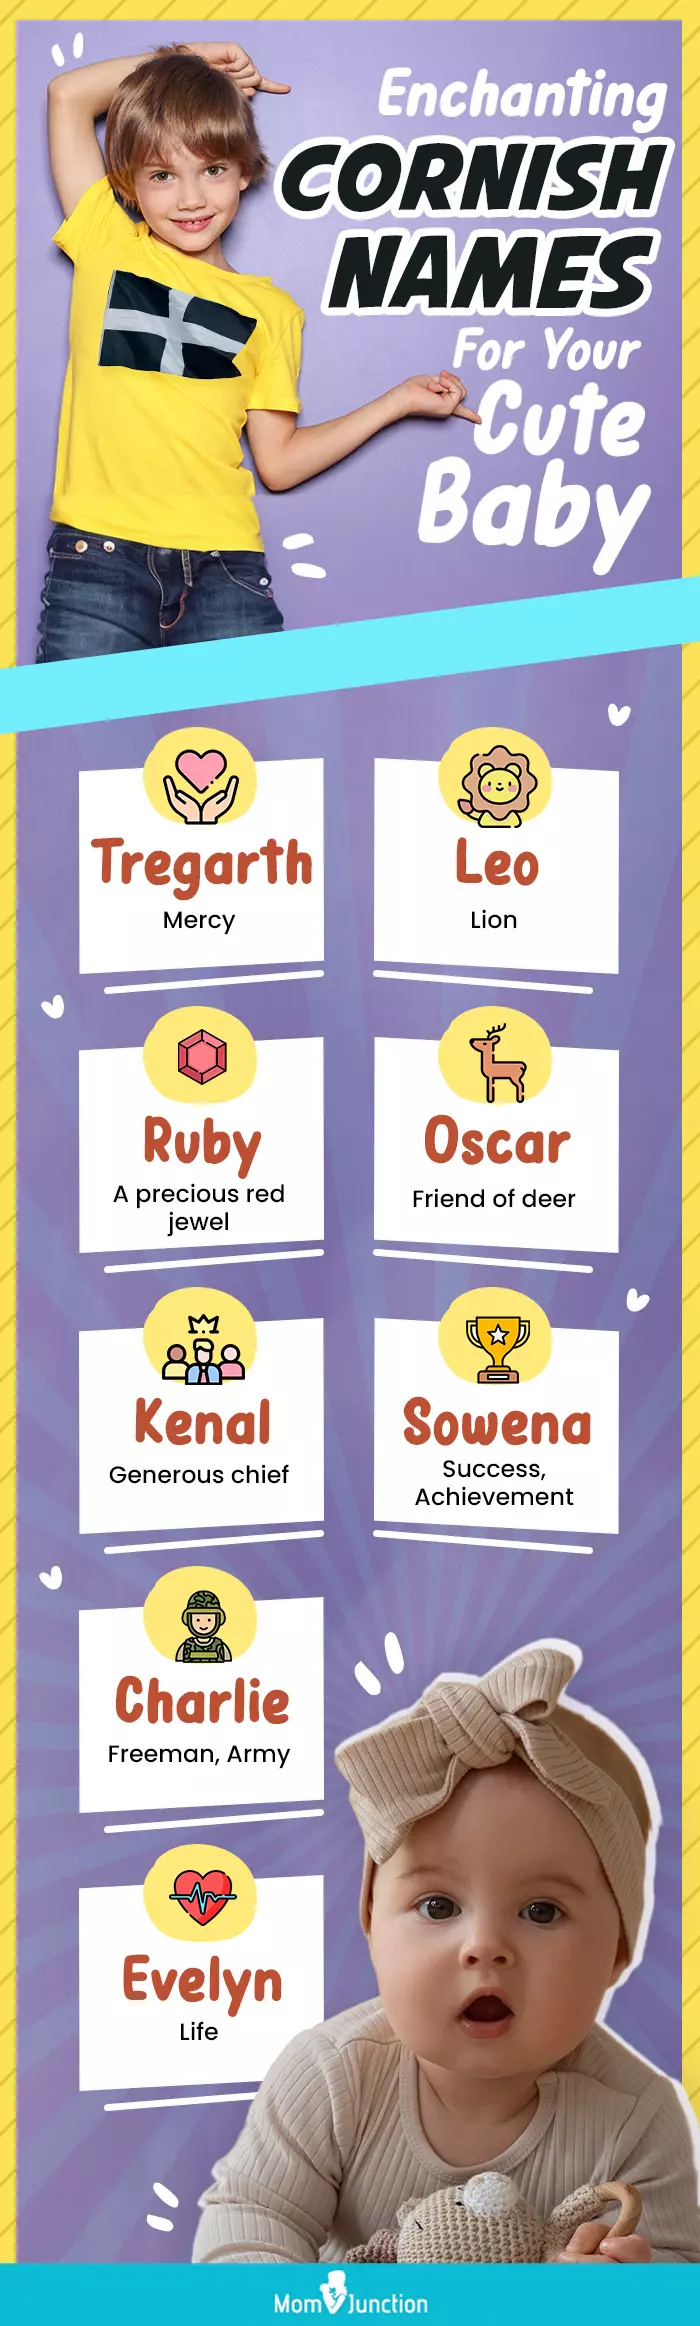 enchanting cornish names for your cute baby (infographic)